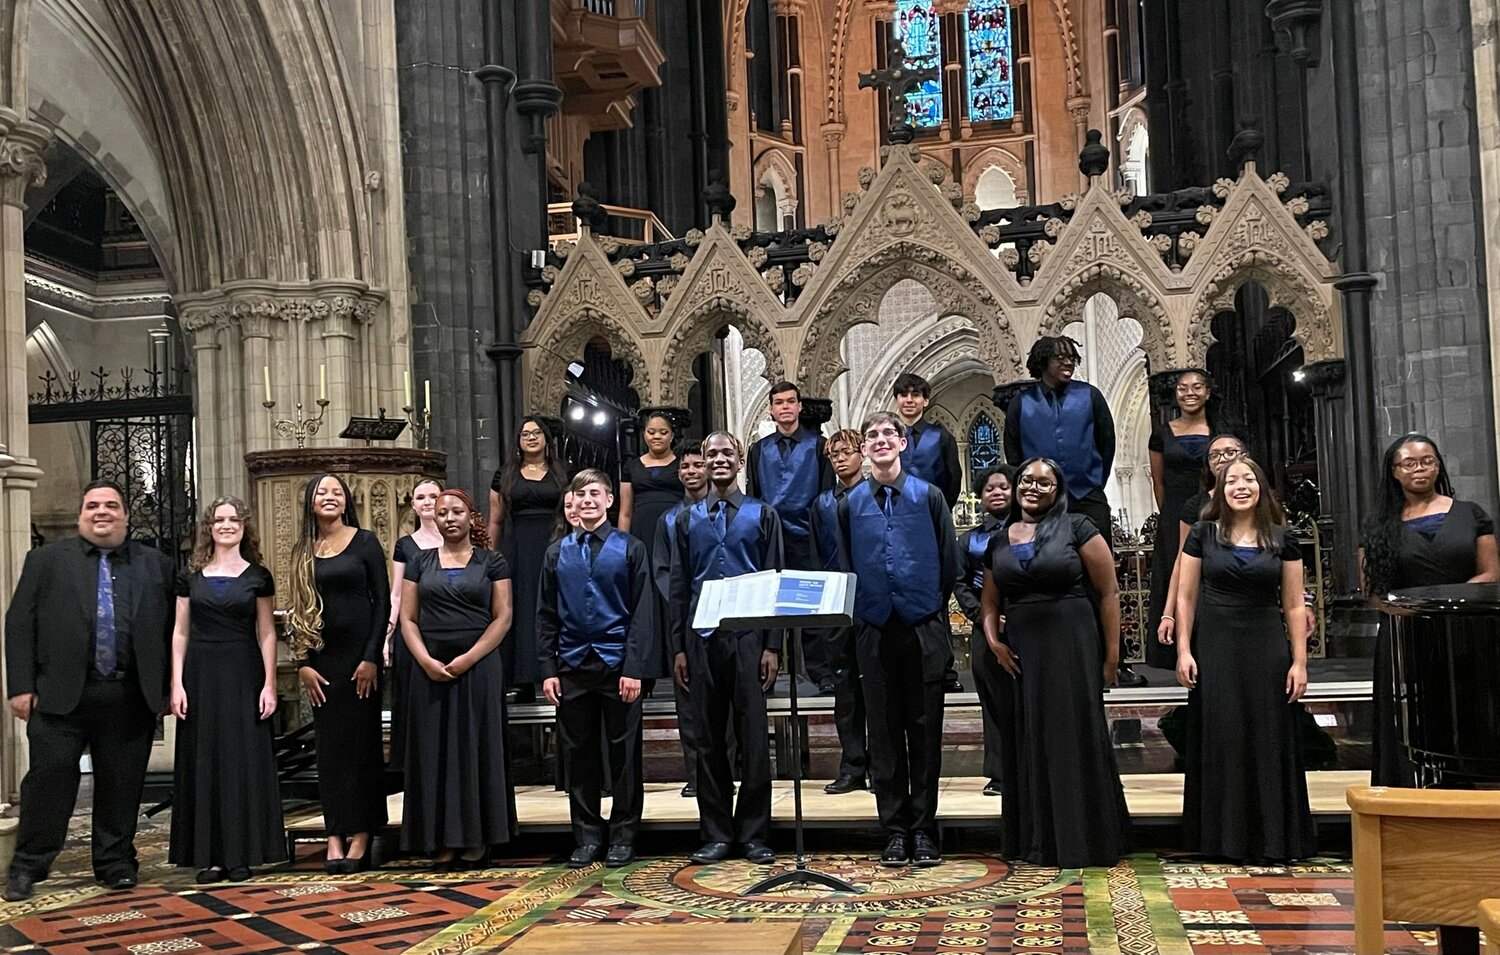 The Malverne Select Choir, led by Choral Director Ken Zagare, at Christ Church Cathedral in Dublin, Ireland following their performance on July 4.